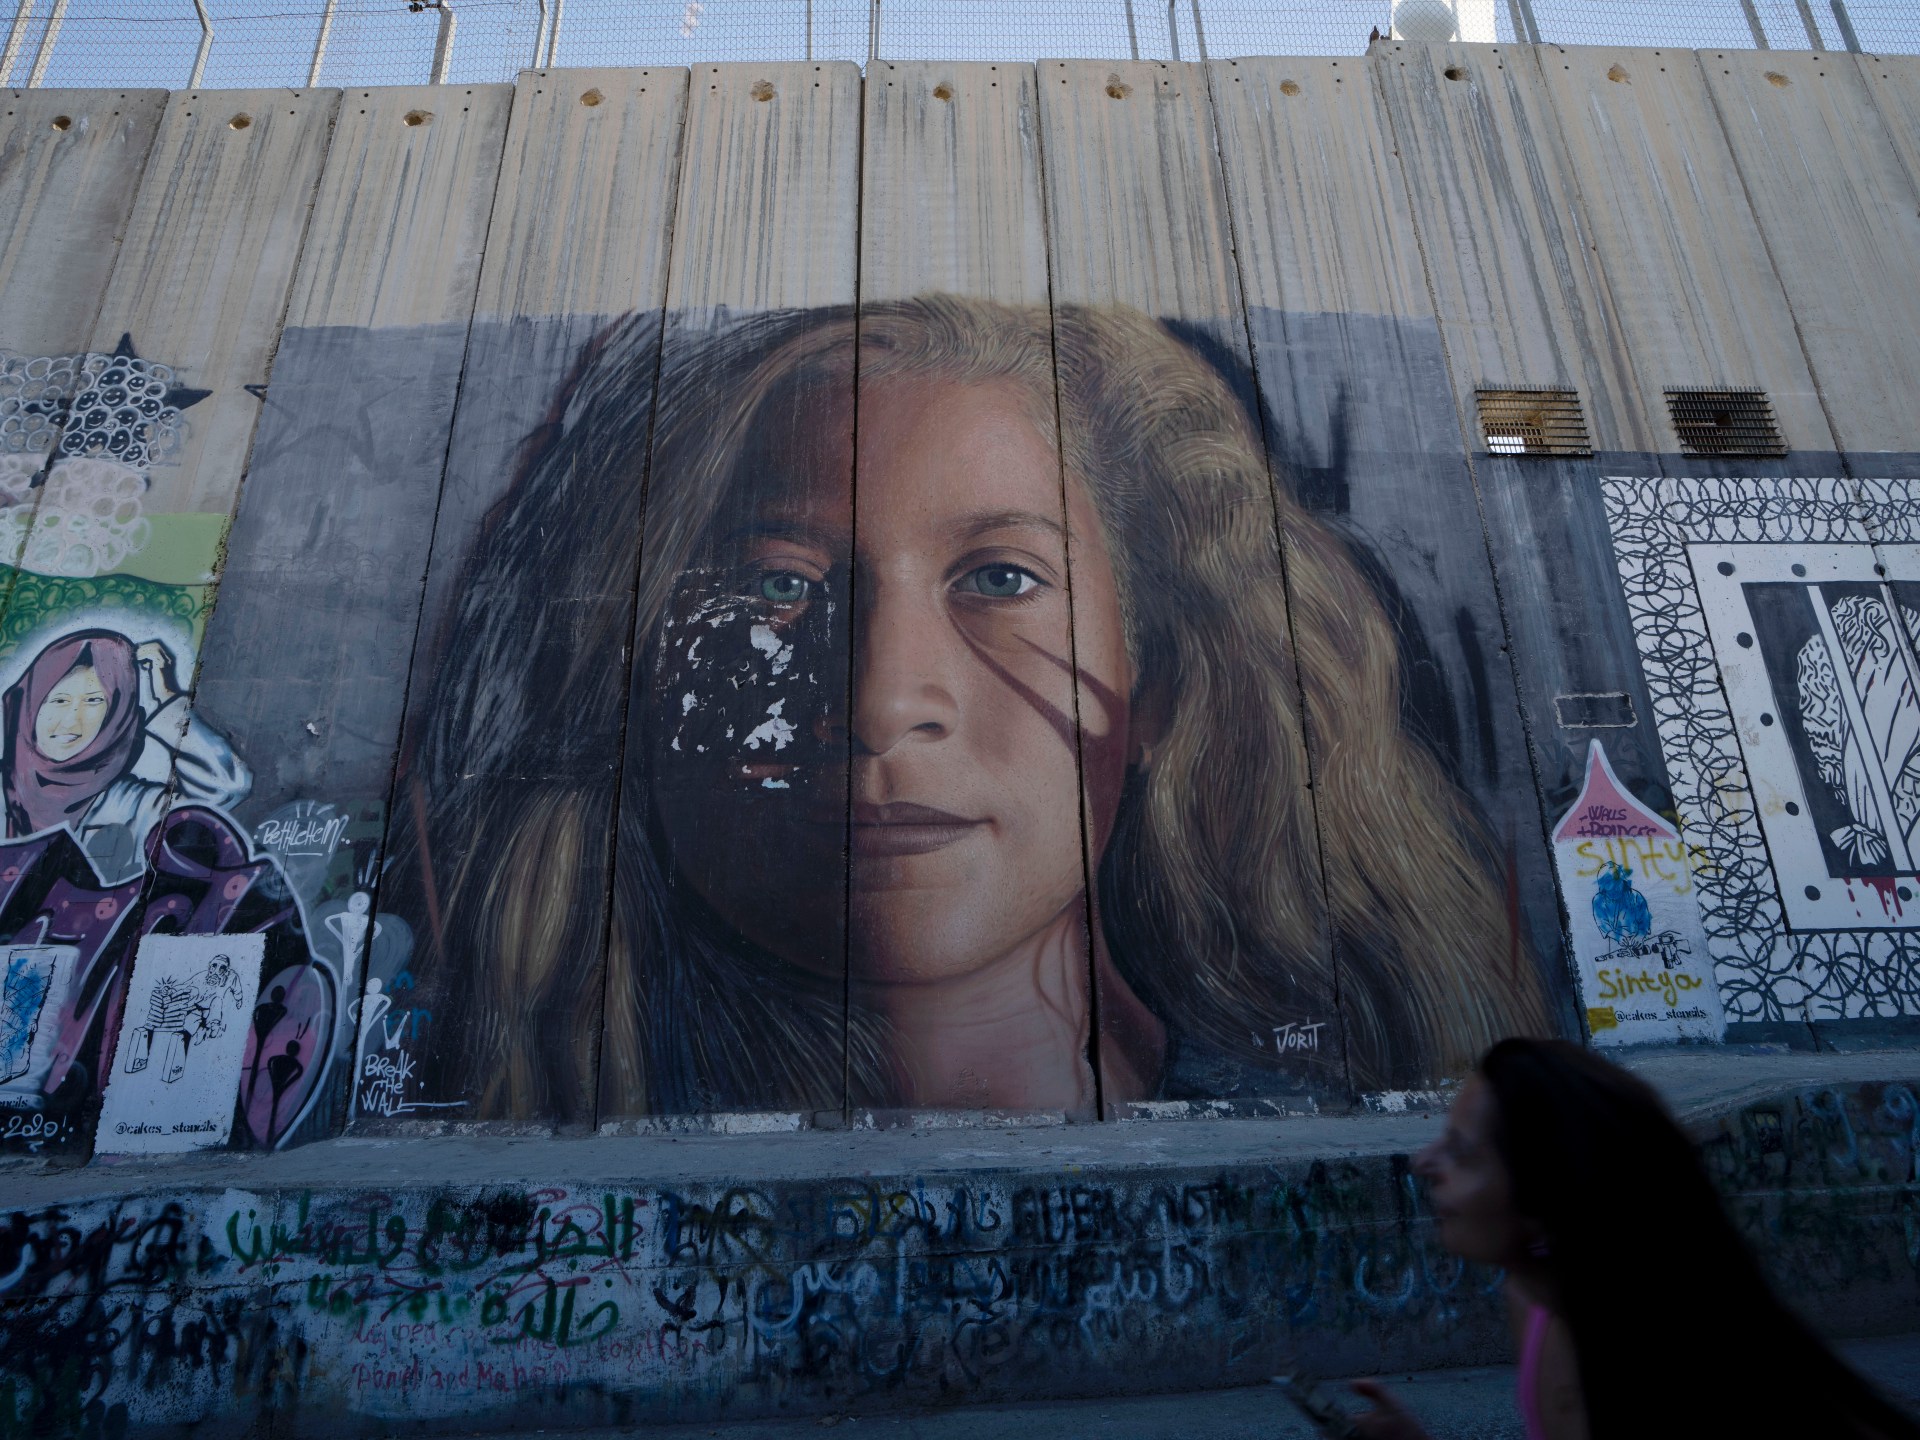 Israel arrests Palestinian activist Ahed Tamimi in occupied West Bank raids